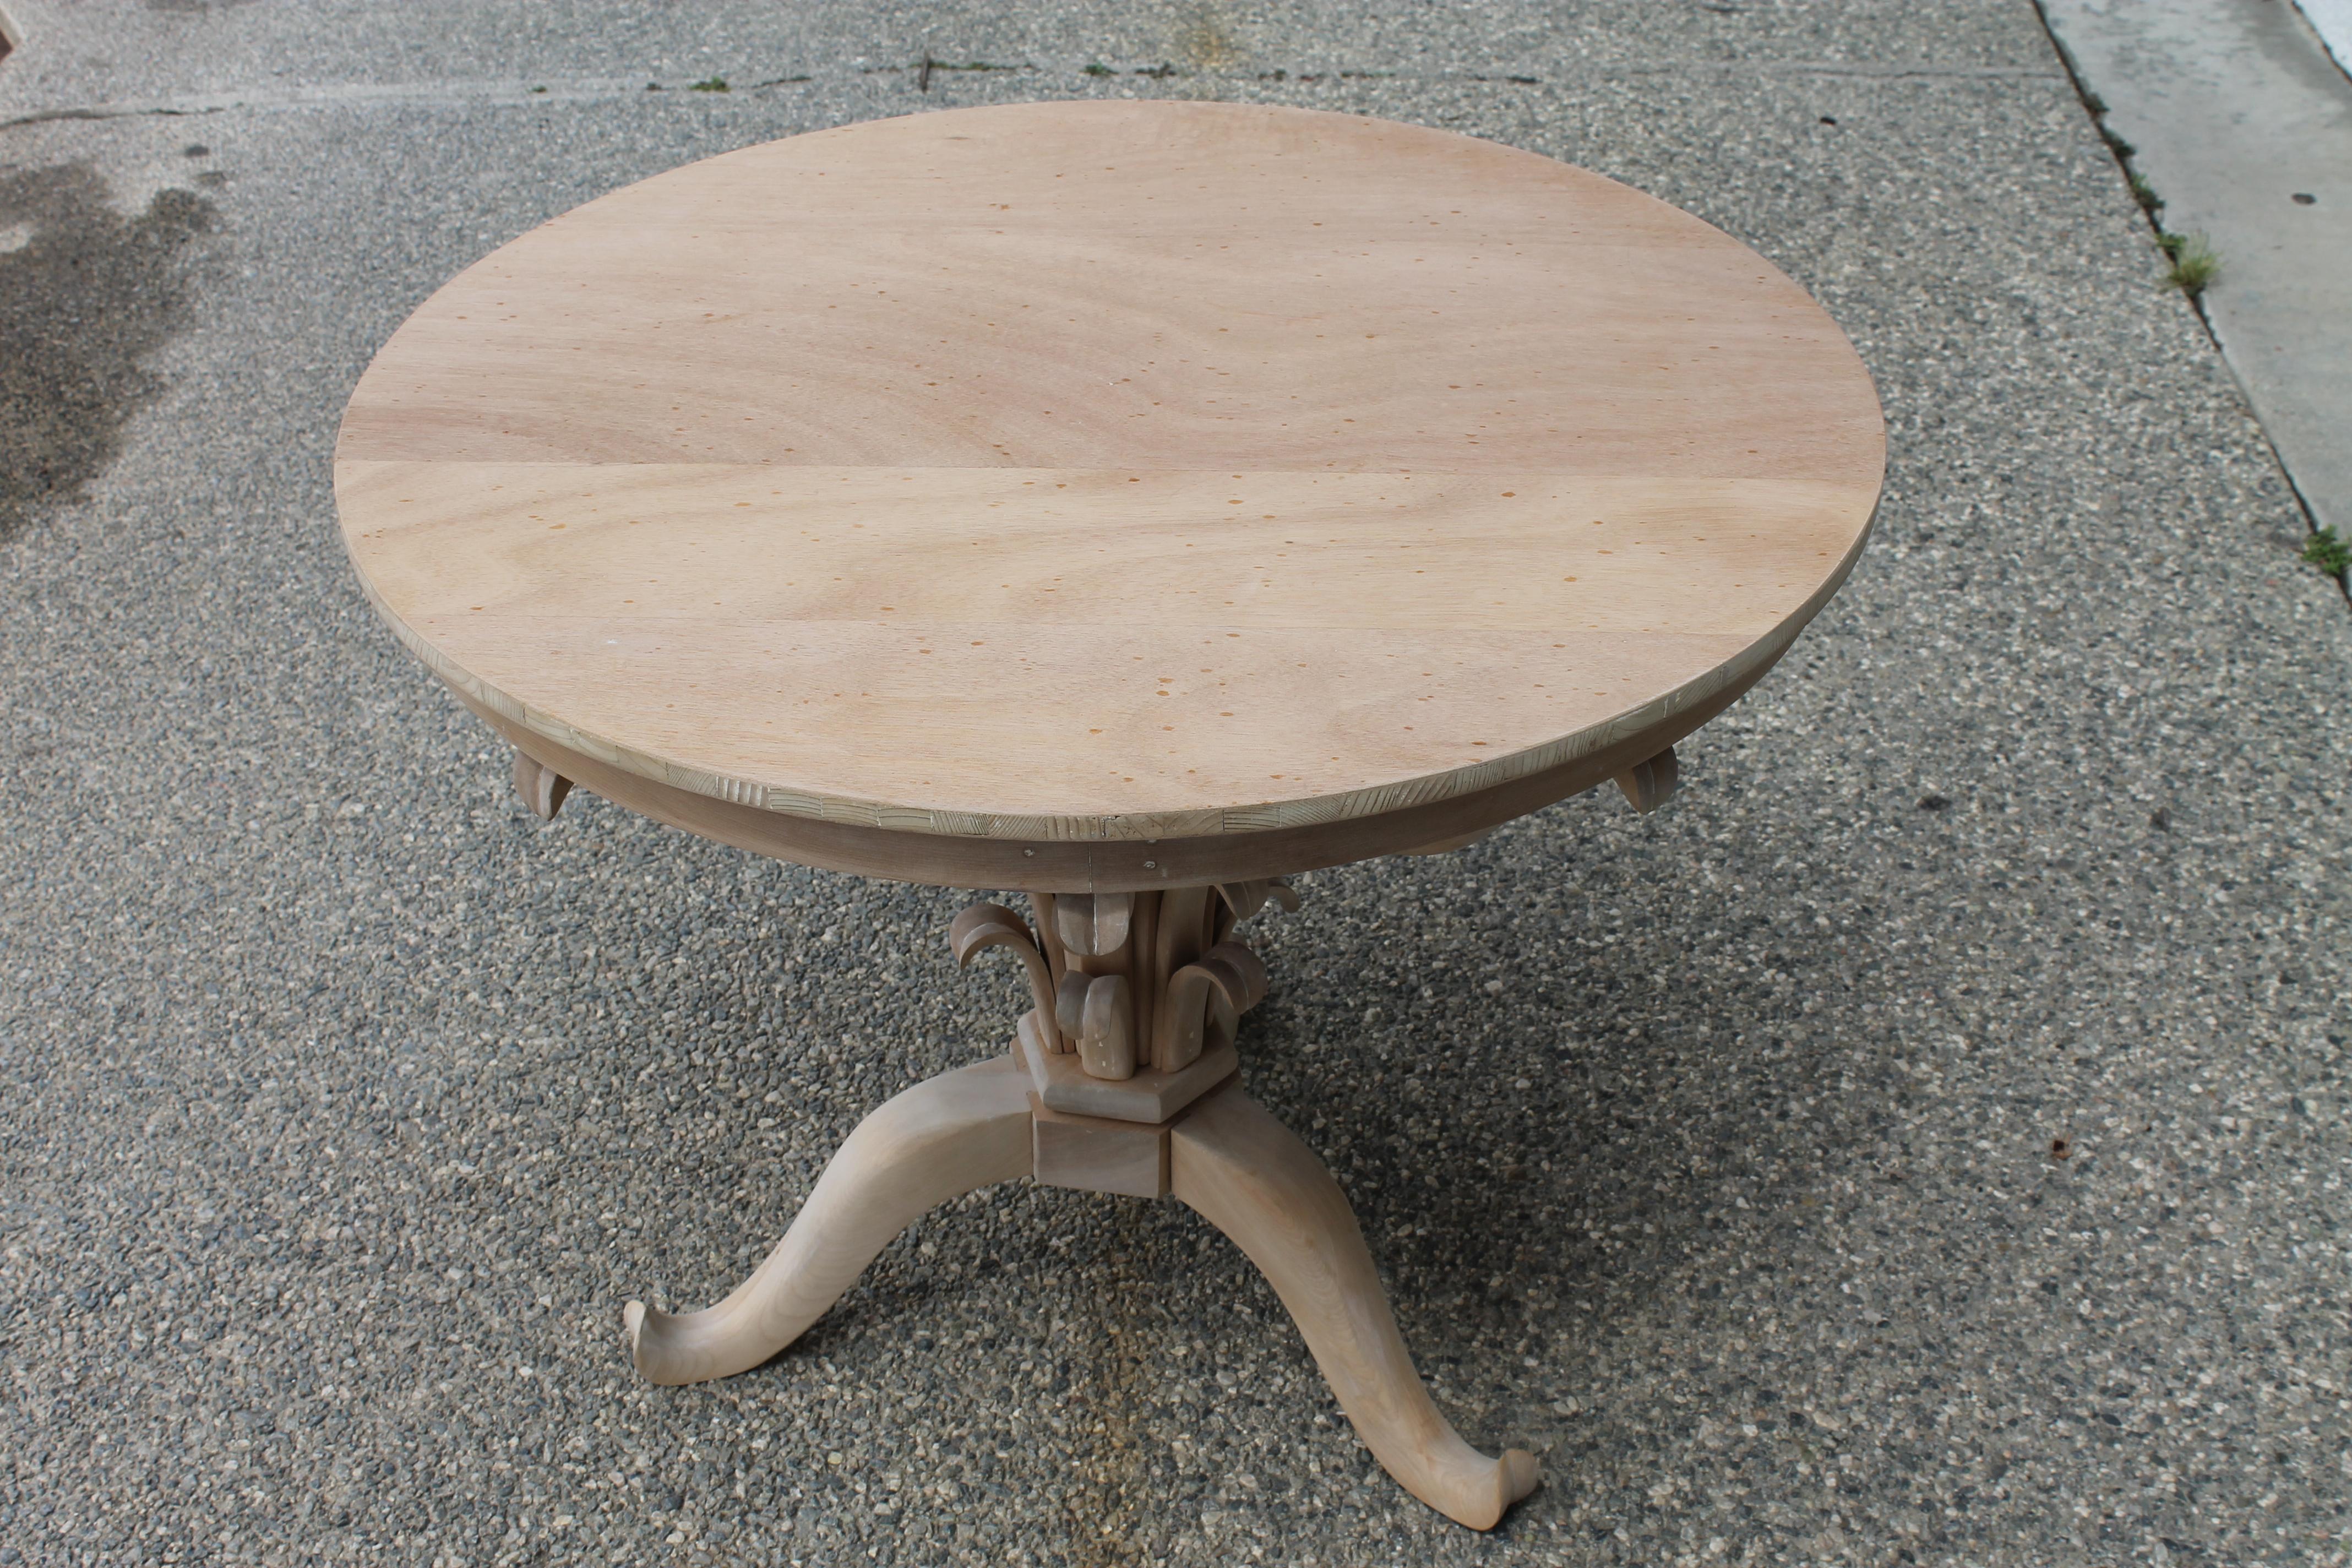 Occasional table that we believe was designed by T.H. Robsjohn-Gibbings and produced by the Widdicomb Furniture Company, Grand Rapids, Michigan. Gibbings table measures 31” diameter and 24.25” high. We had the table stripped of old paint and it